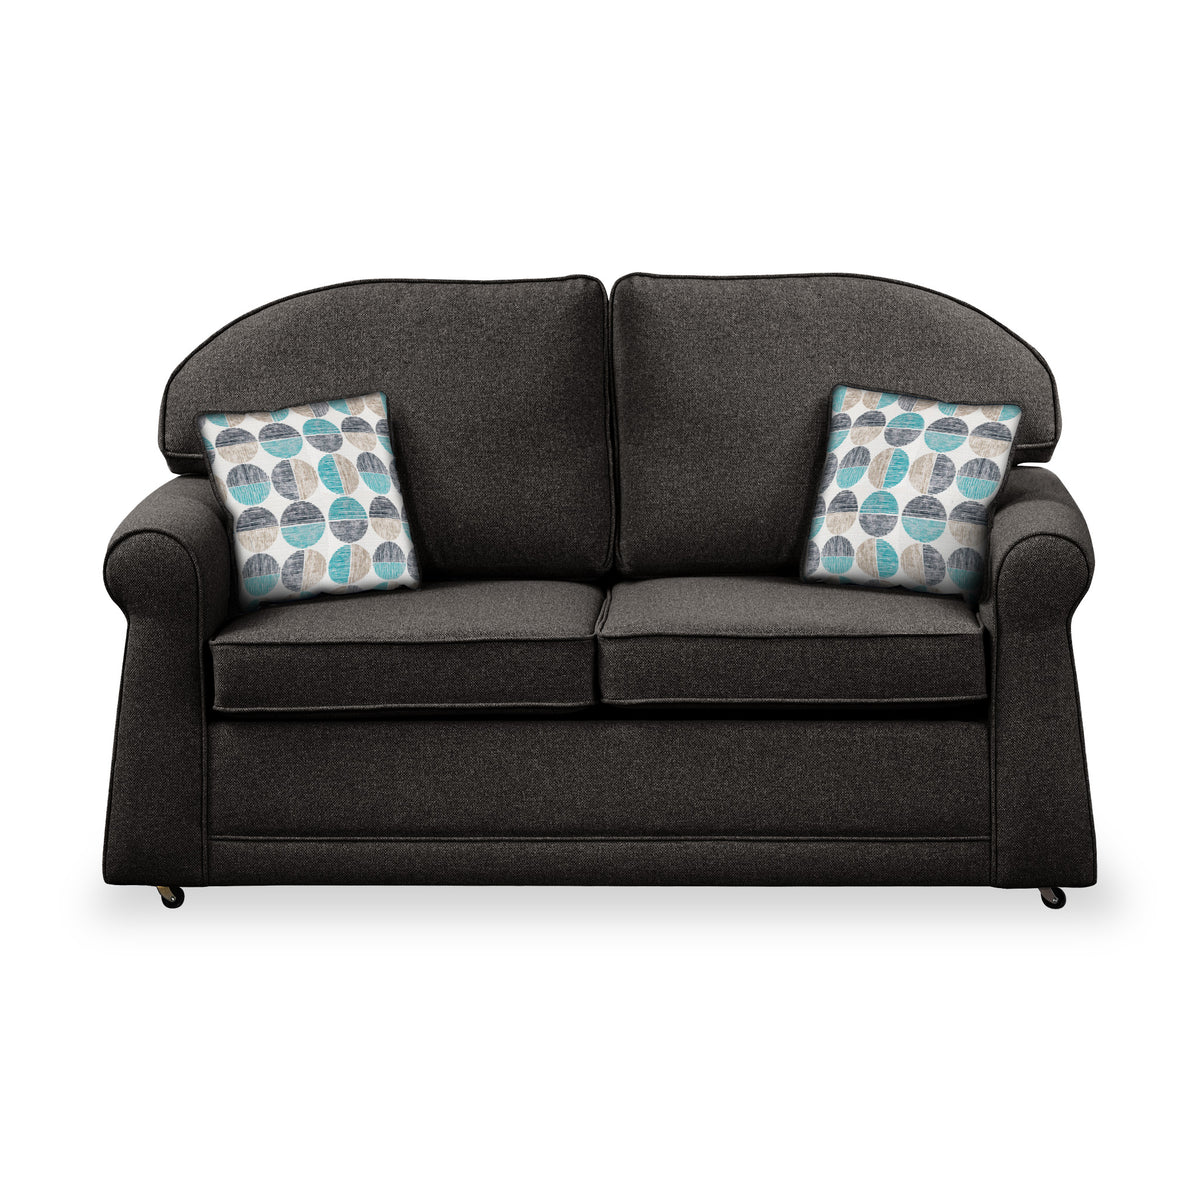 Croxdon Charcoal Faux Linen 2 Seater Sofabed with Duck Egg Scatter Cushions from Roseland Furniture